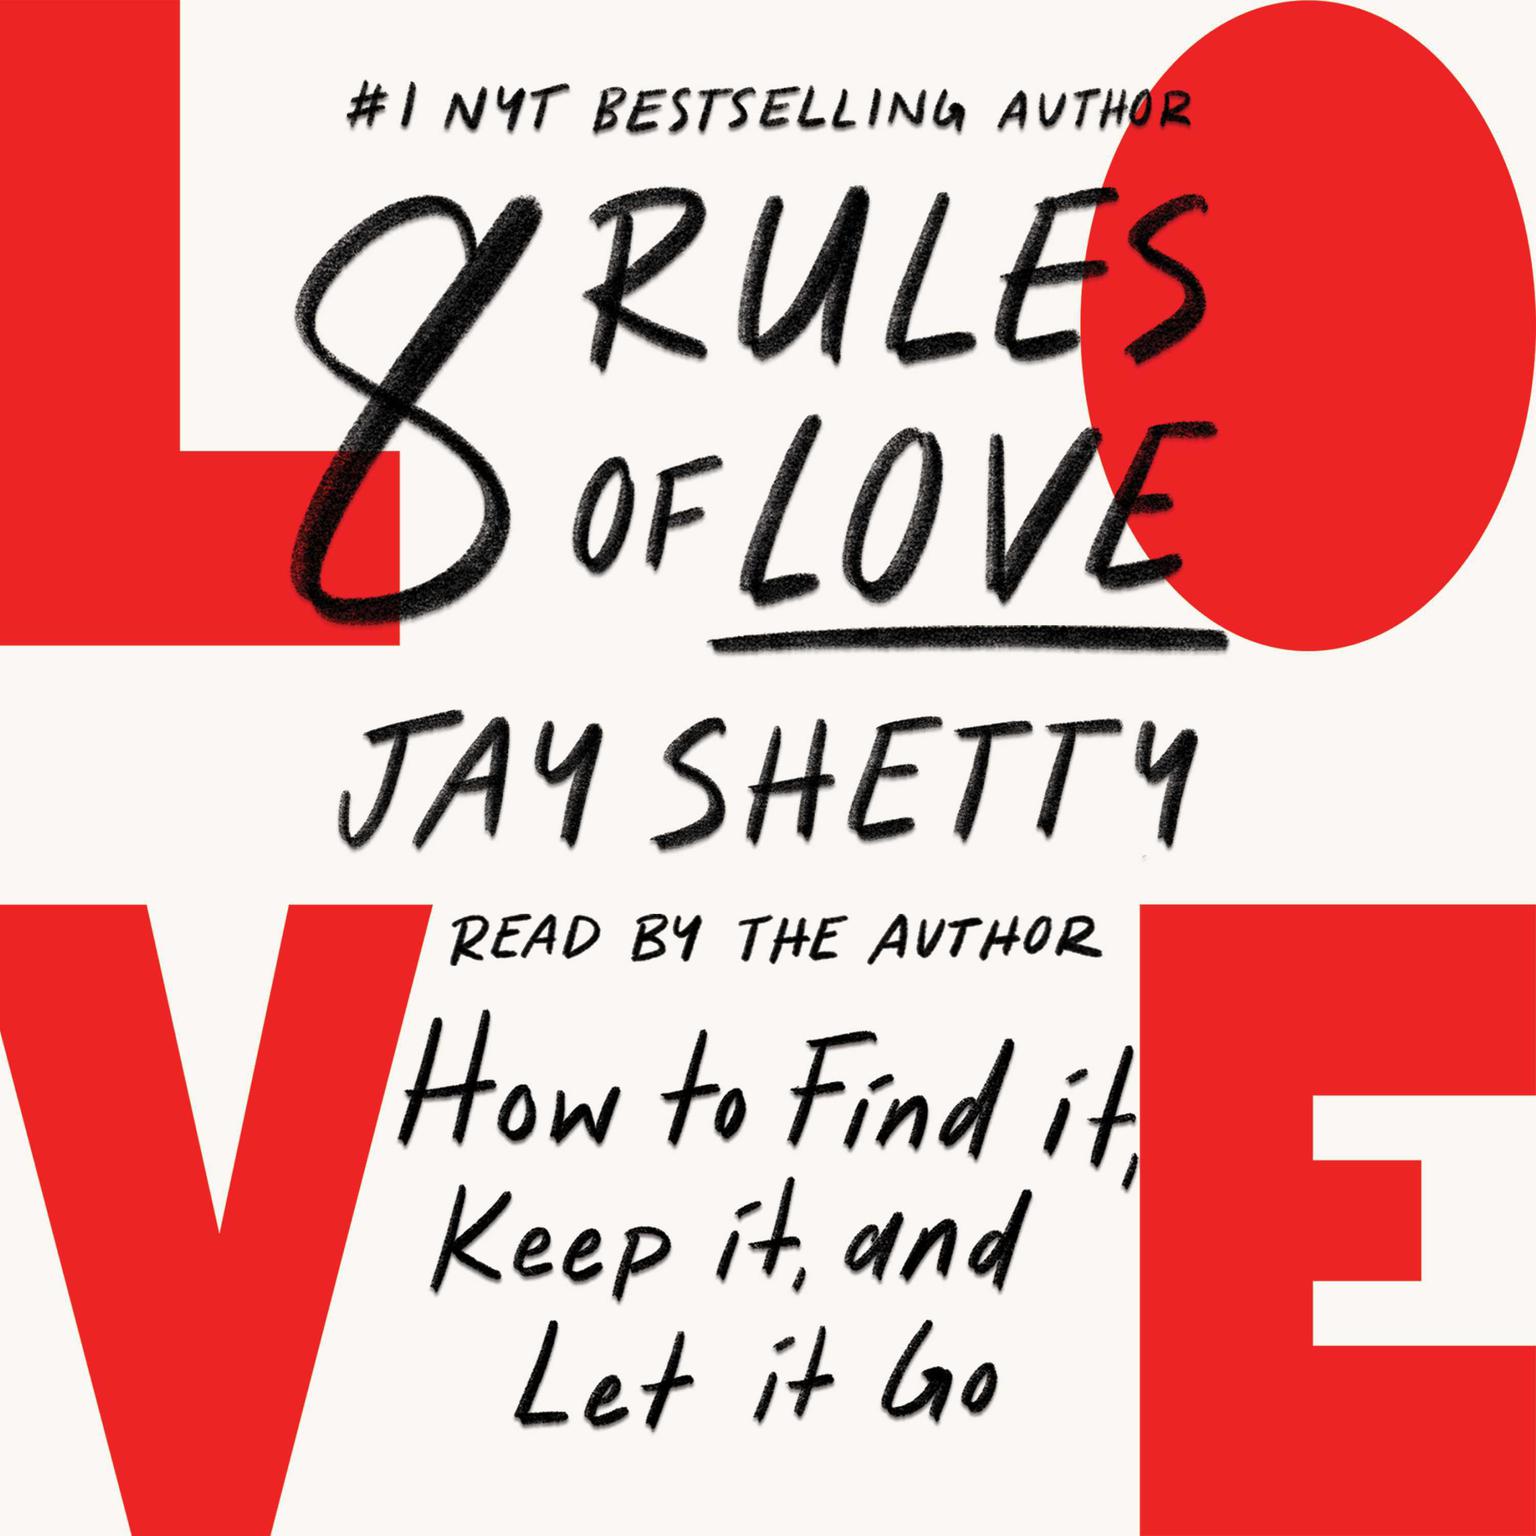 8 Rules of Love: How to Find It, Keep It, and Let It Go Audiobook, by Jay Shetty